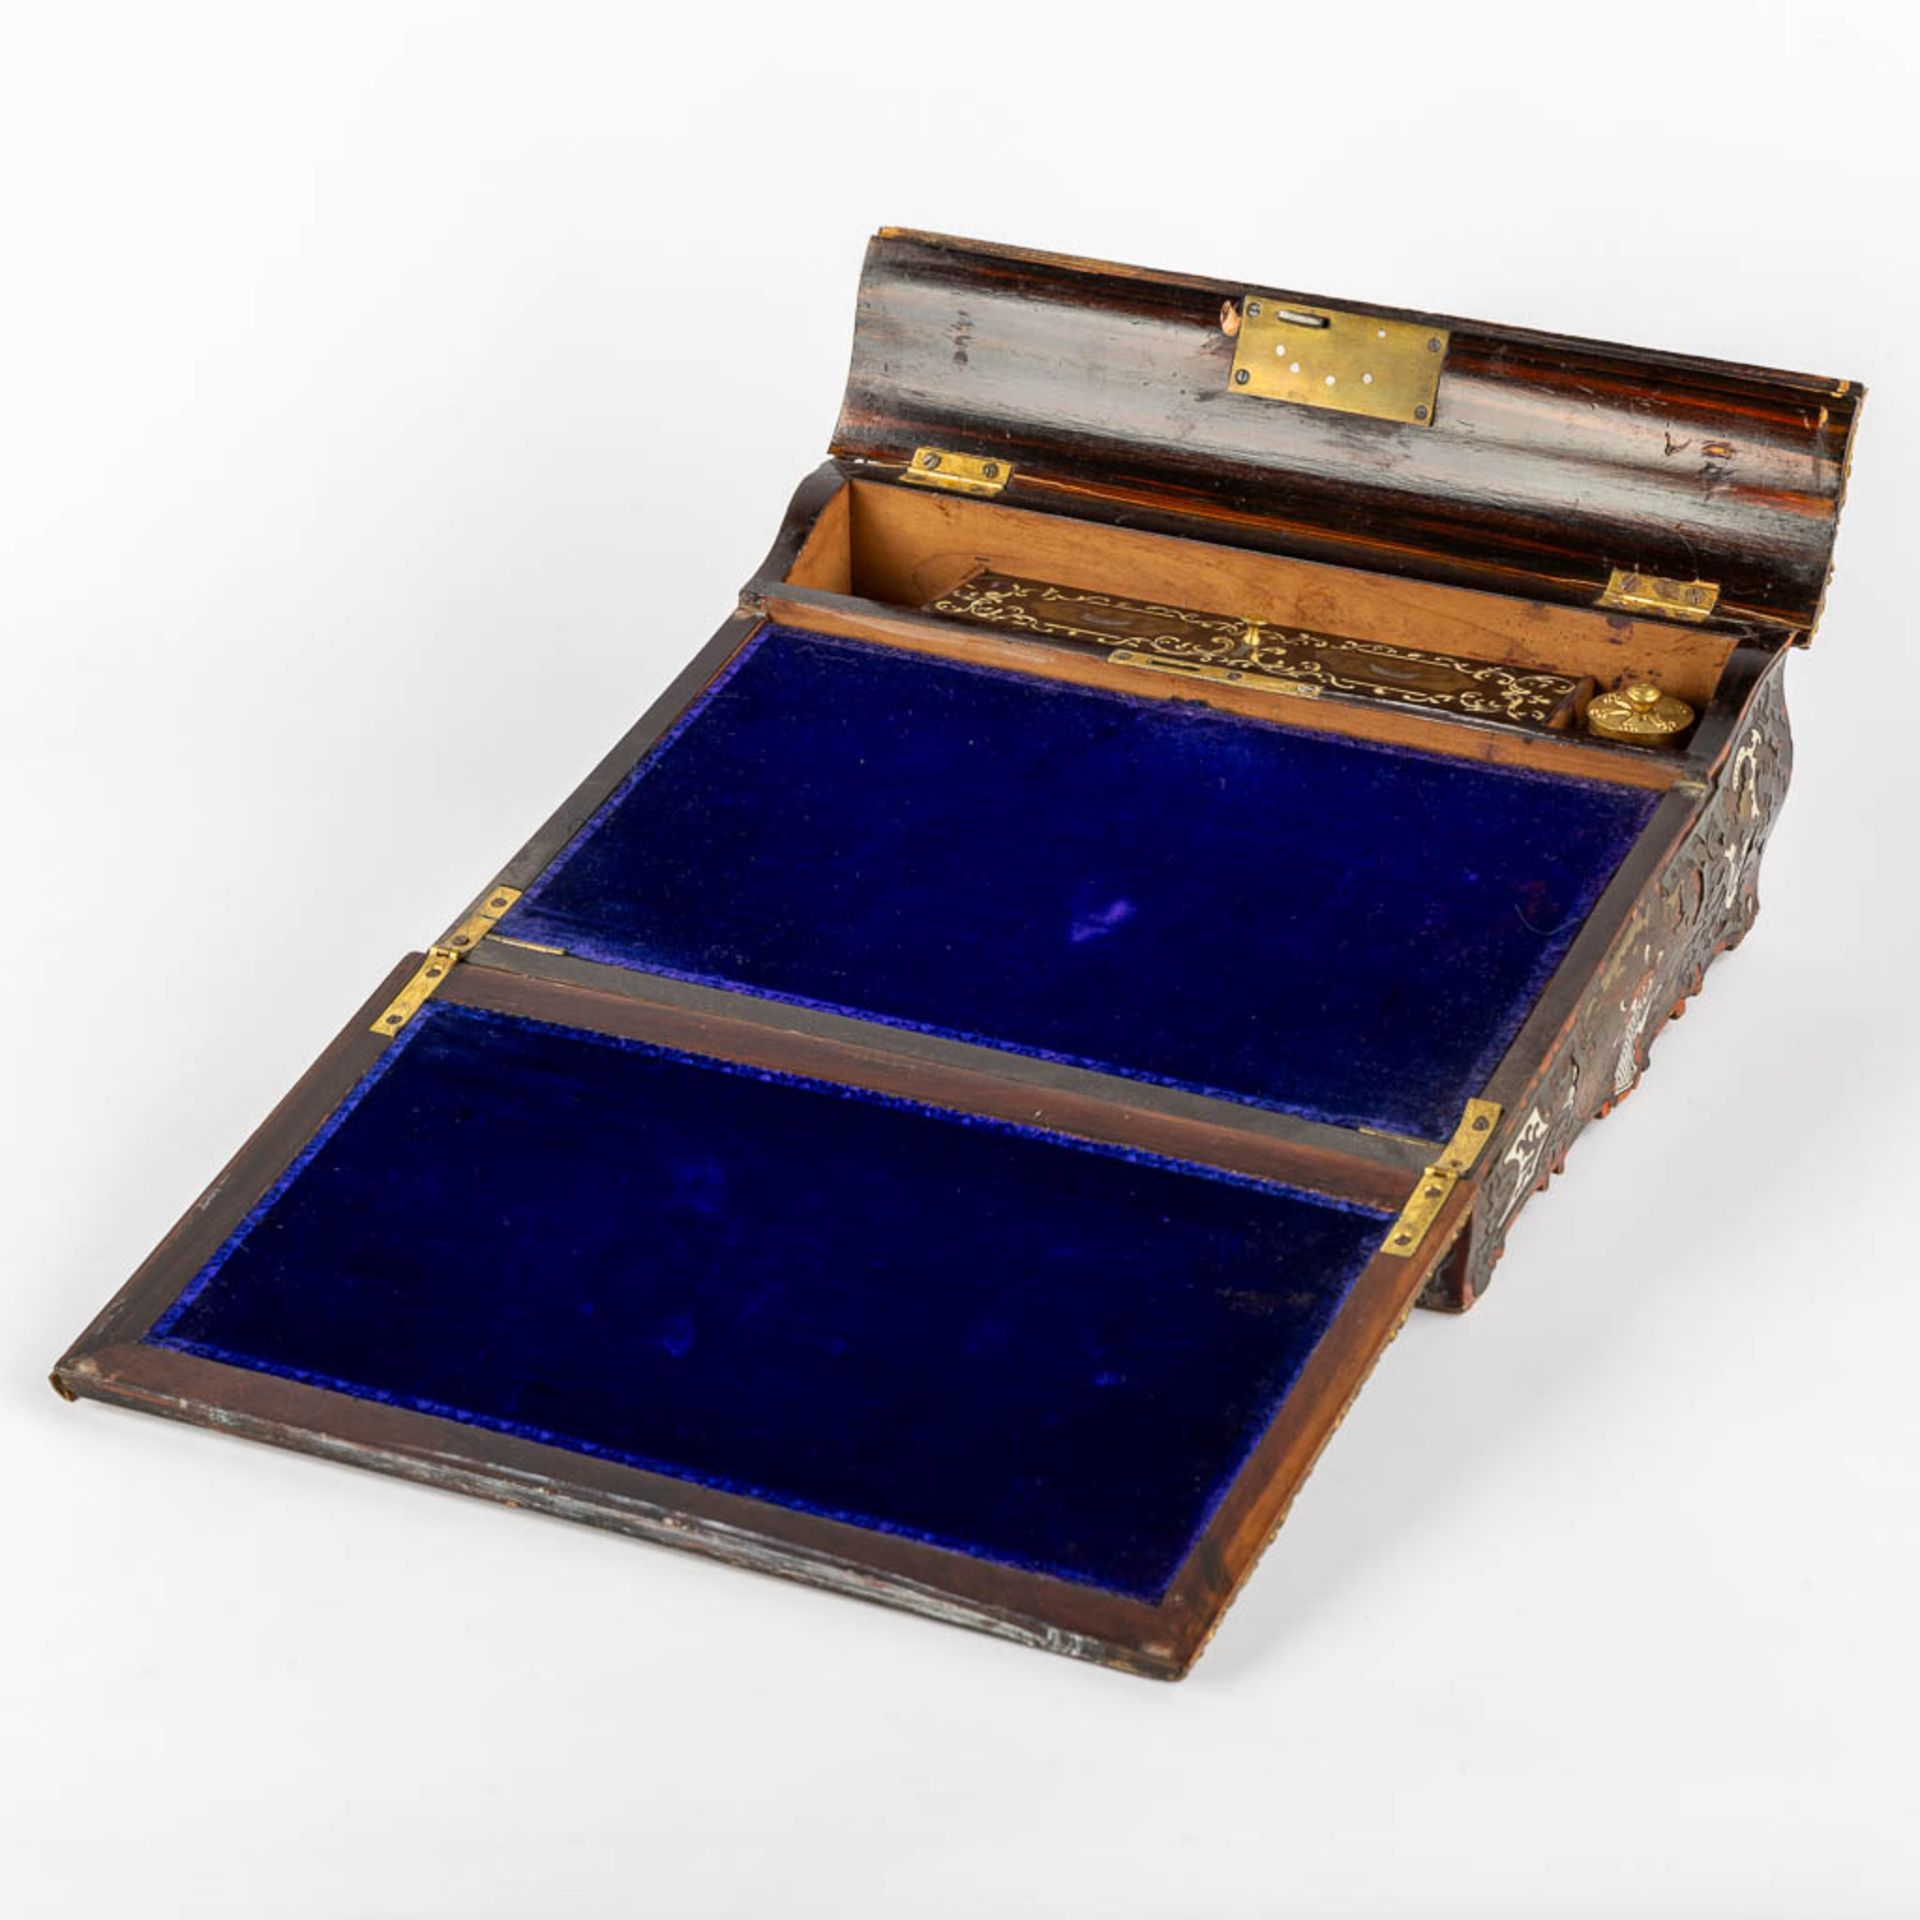 An antique writing desk, Boulle and marquetry inlay. Napoleon 3. (L:24 x W:31 x H:10,5 cm) - Bild 3 aus 12